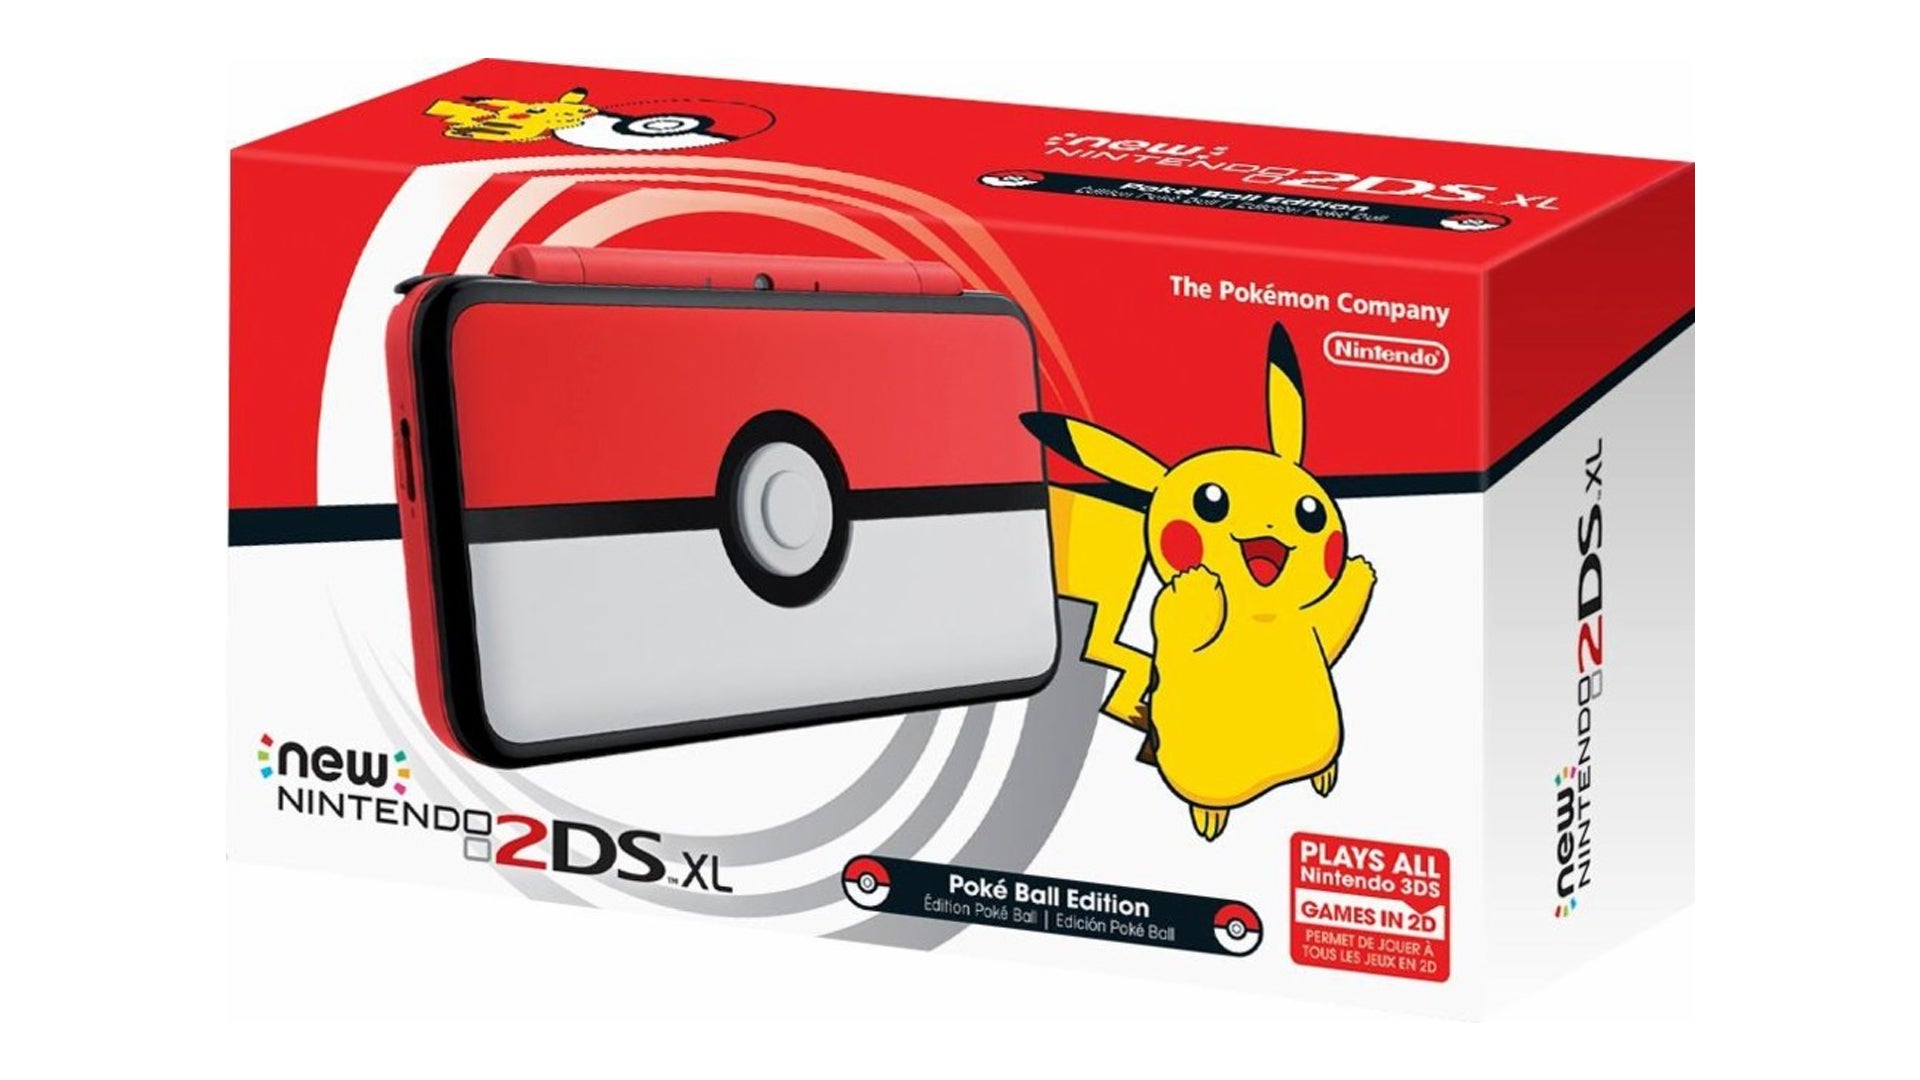 Image for The PokéBall New Nintendo 2DS XL Is up for Pre-Order Now